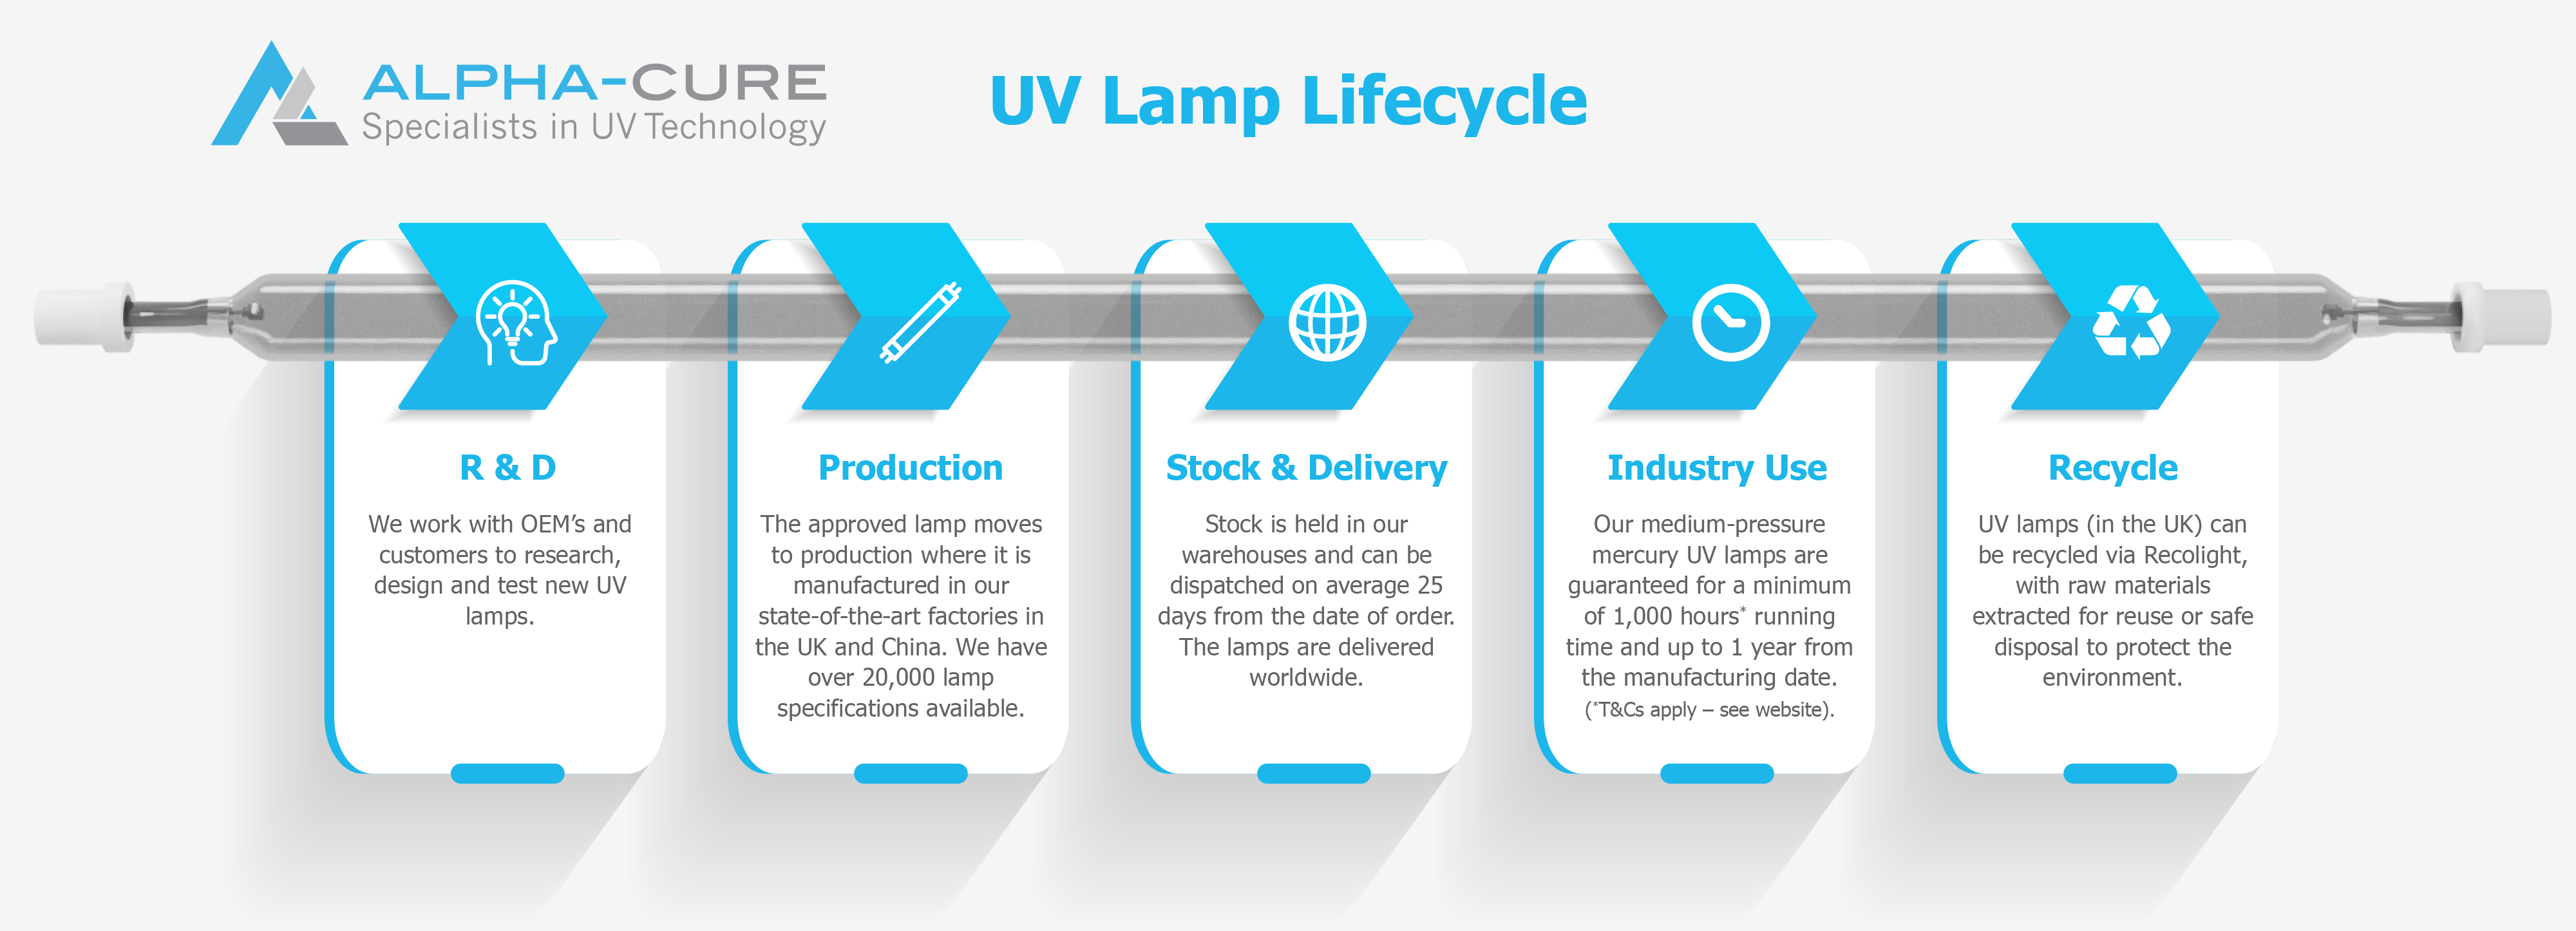 UV lamp lifecycle infographic | Alpha-Cure Ltd